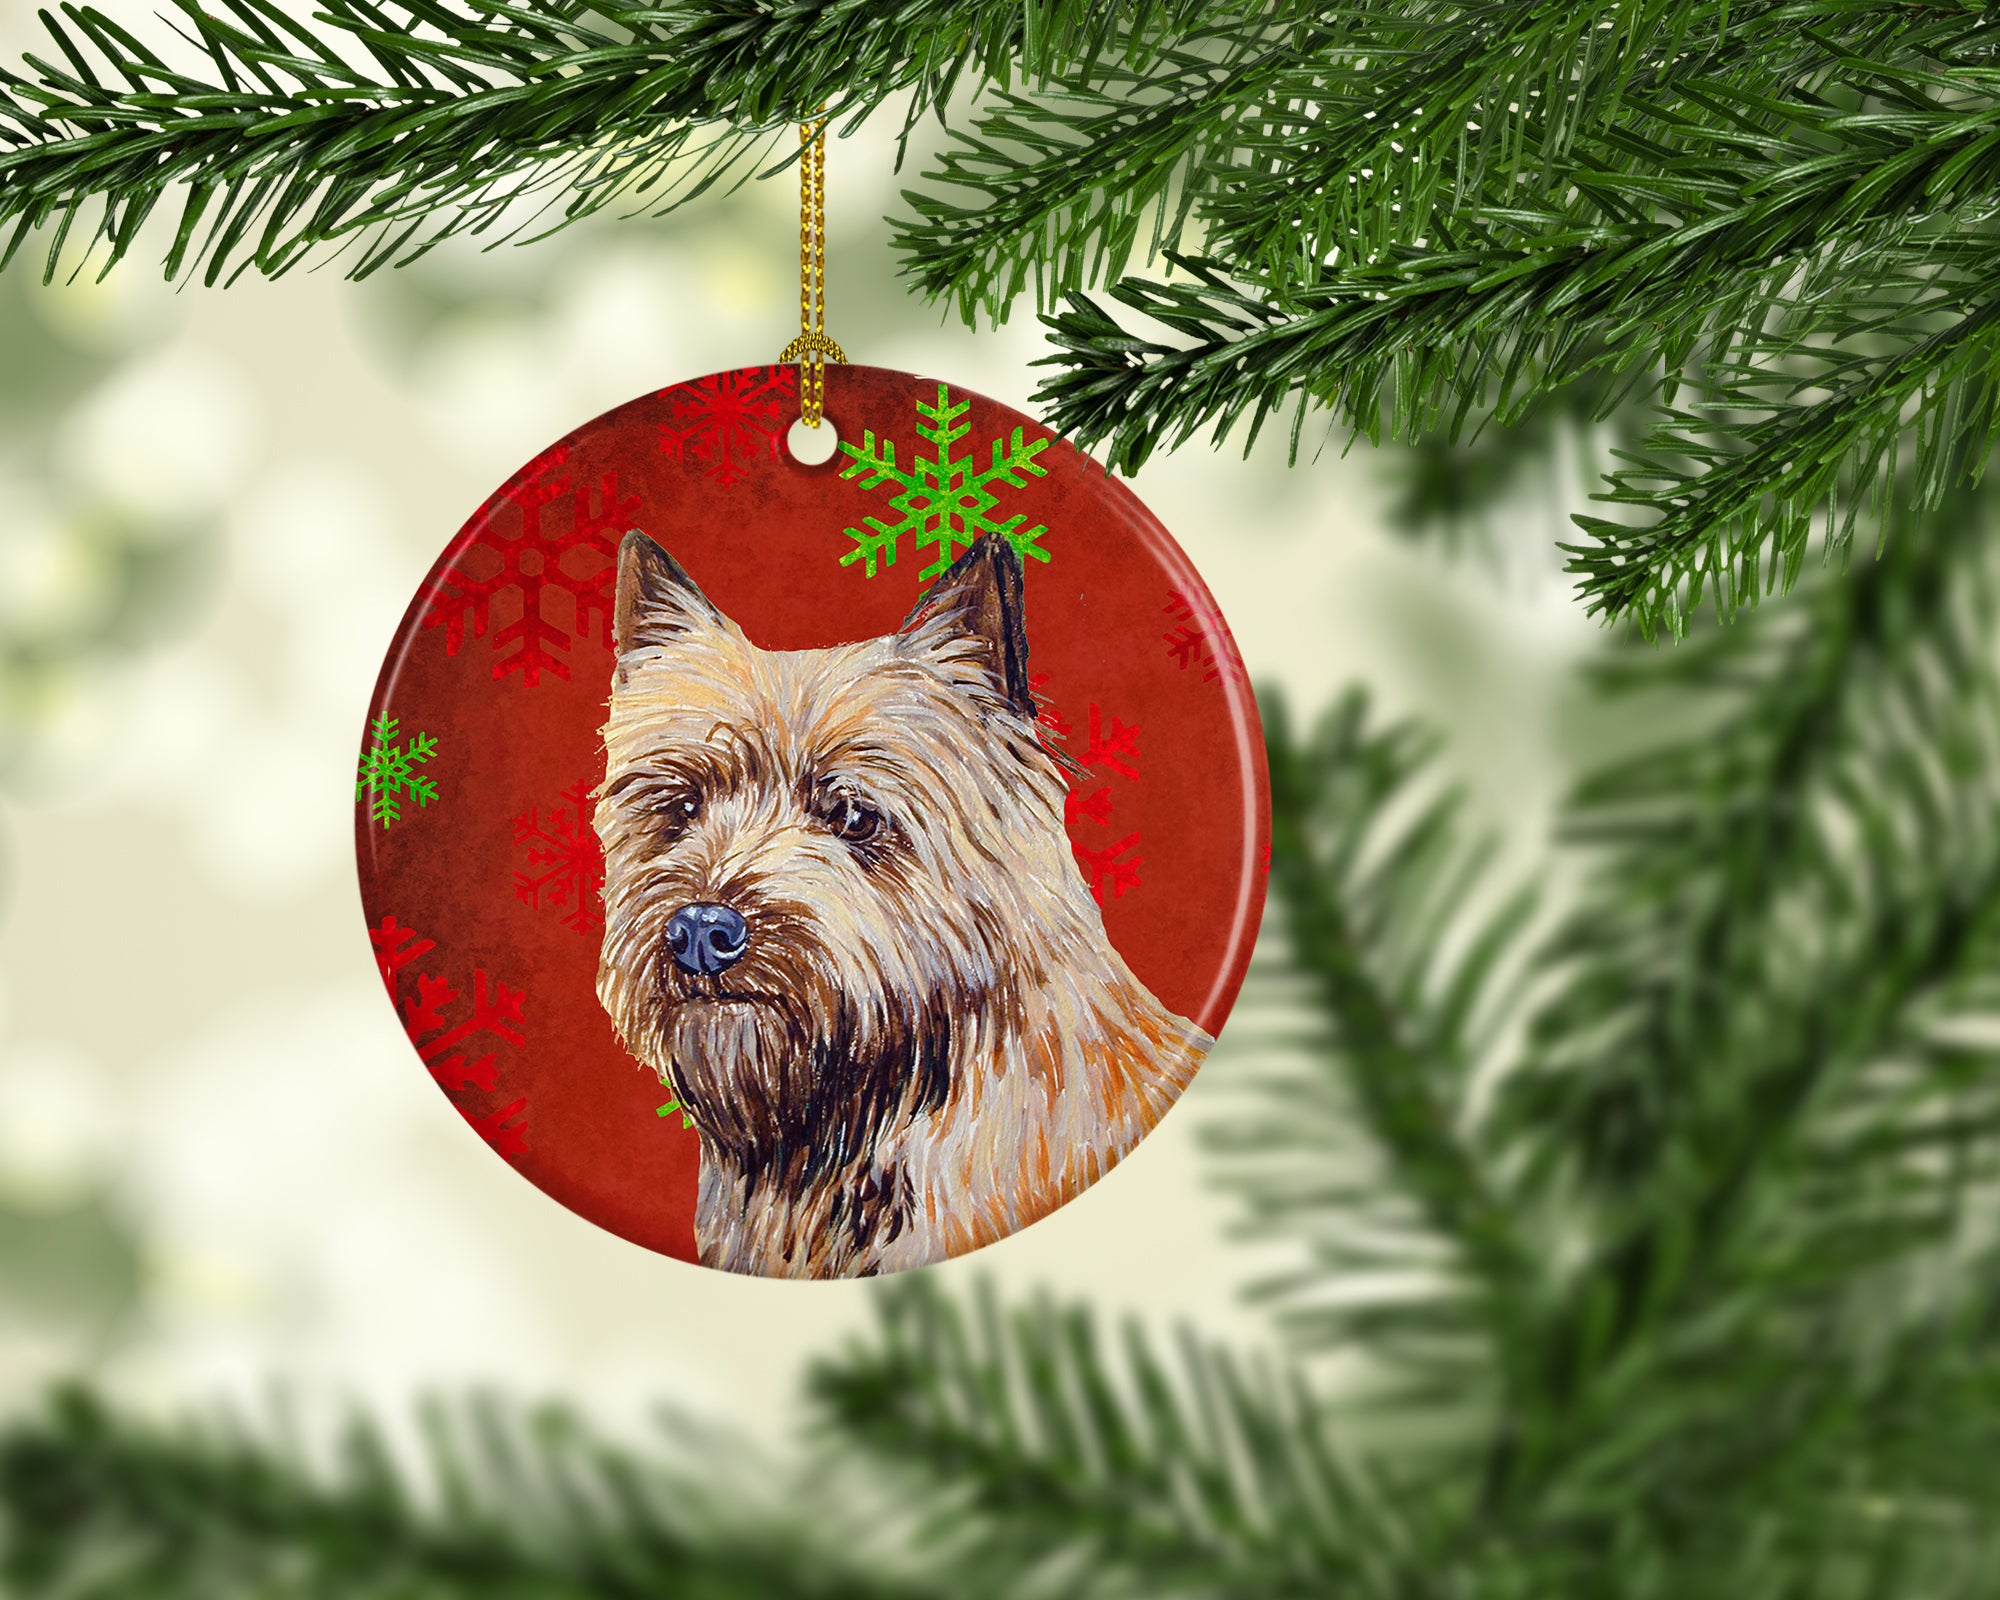 Cairn Terrier Red Snowflake Holiday Christmas Ceramic Ornament LH9320 - the-store.com